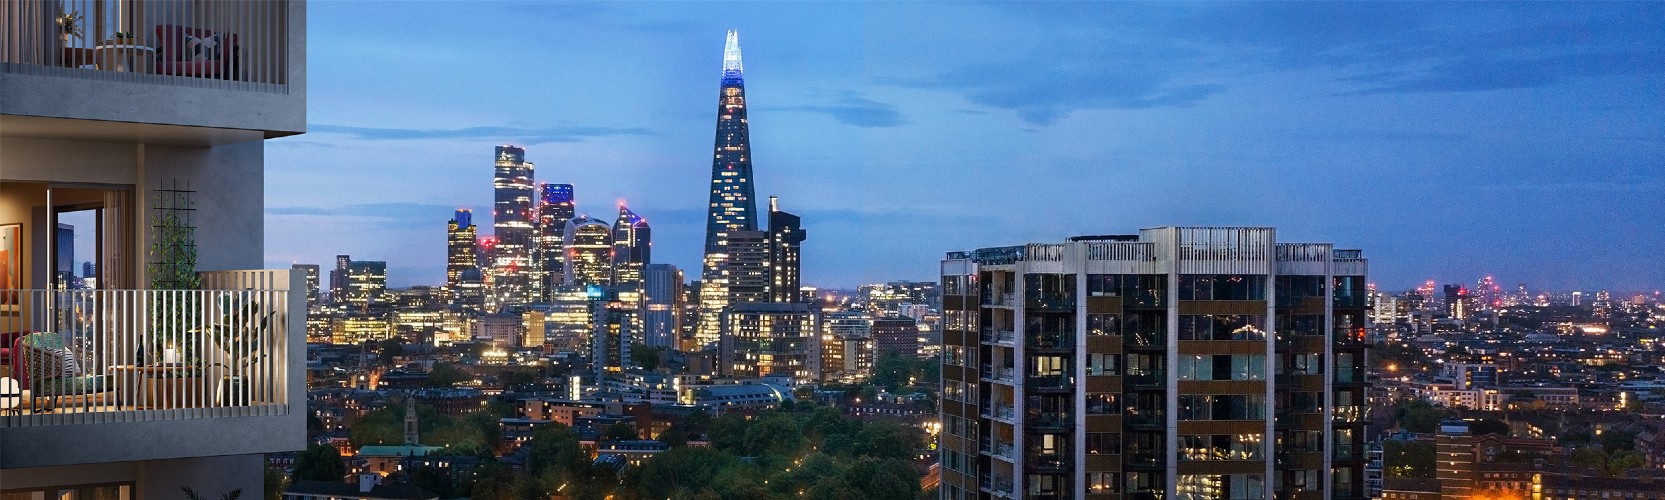 the-shard-view-park-and-sayer.jpg